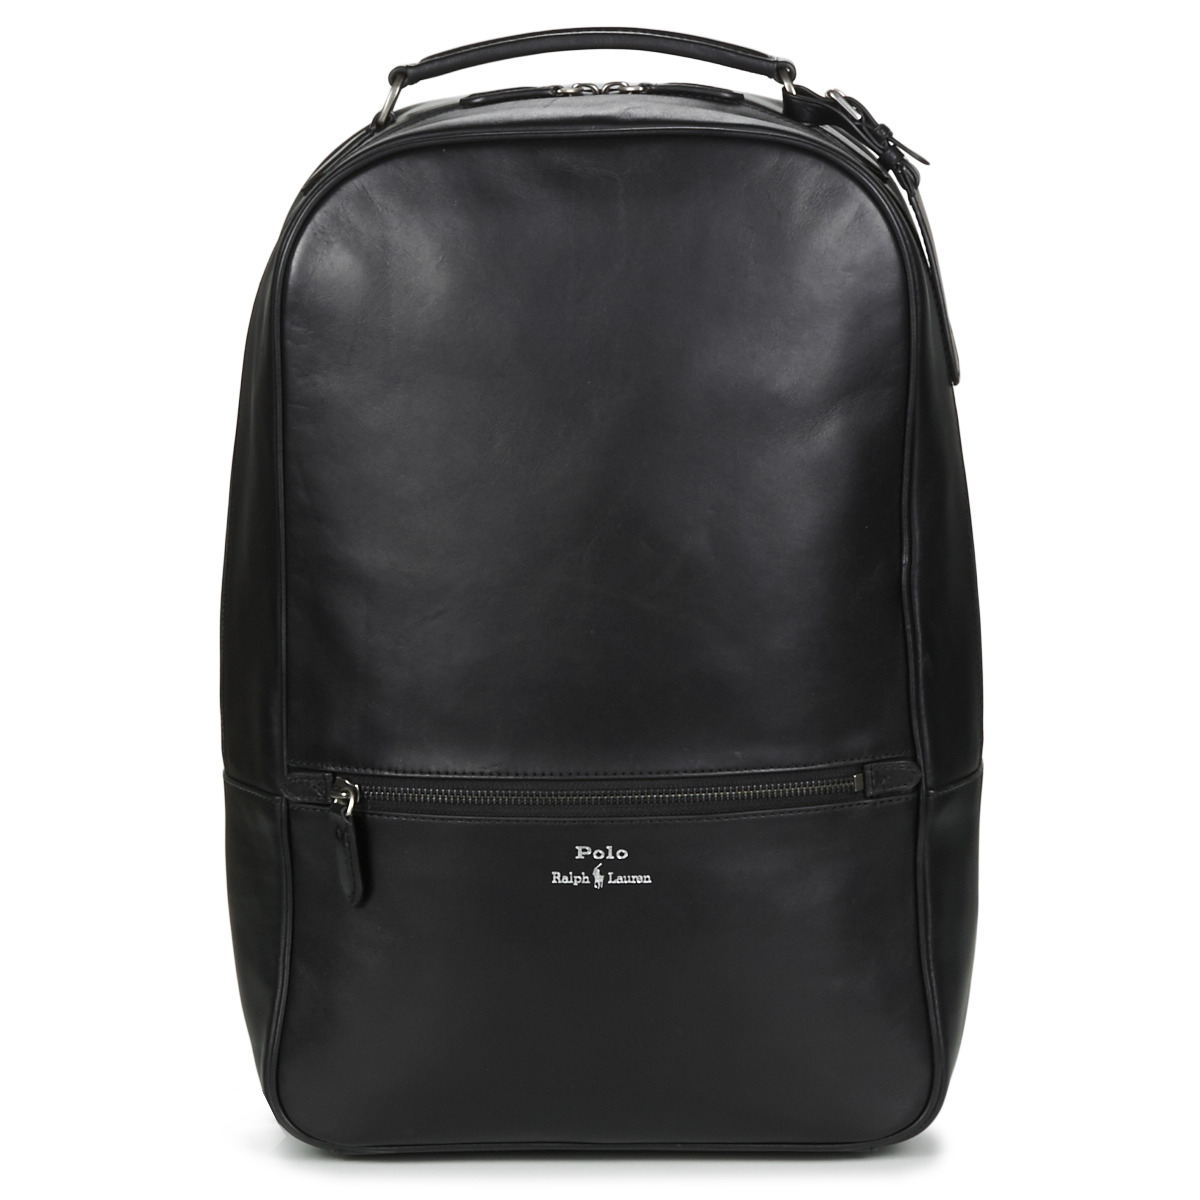 Polo Ralph Lauren Noir BACKPACK SMOOTH LEATHER 3SVz5aN0